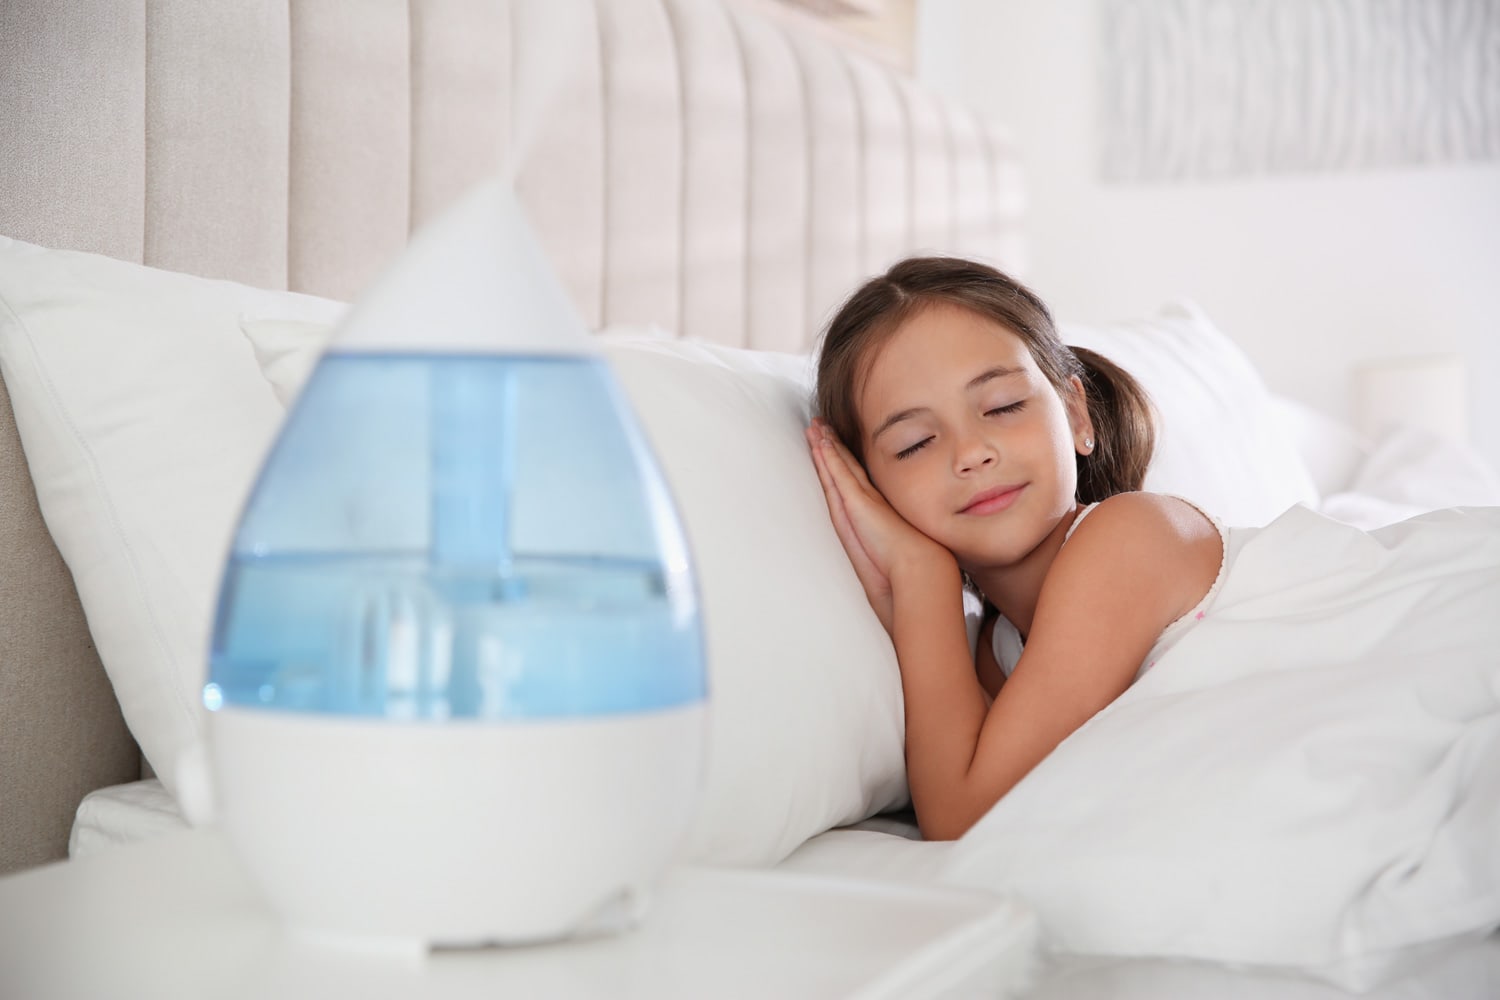 Cute little girl sleeping in bedroom with modern air humidifier